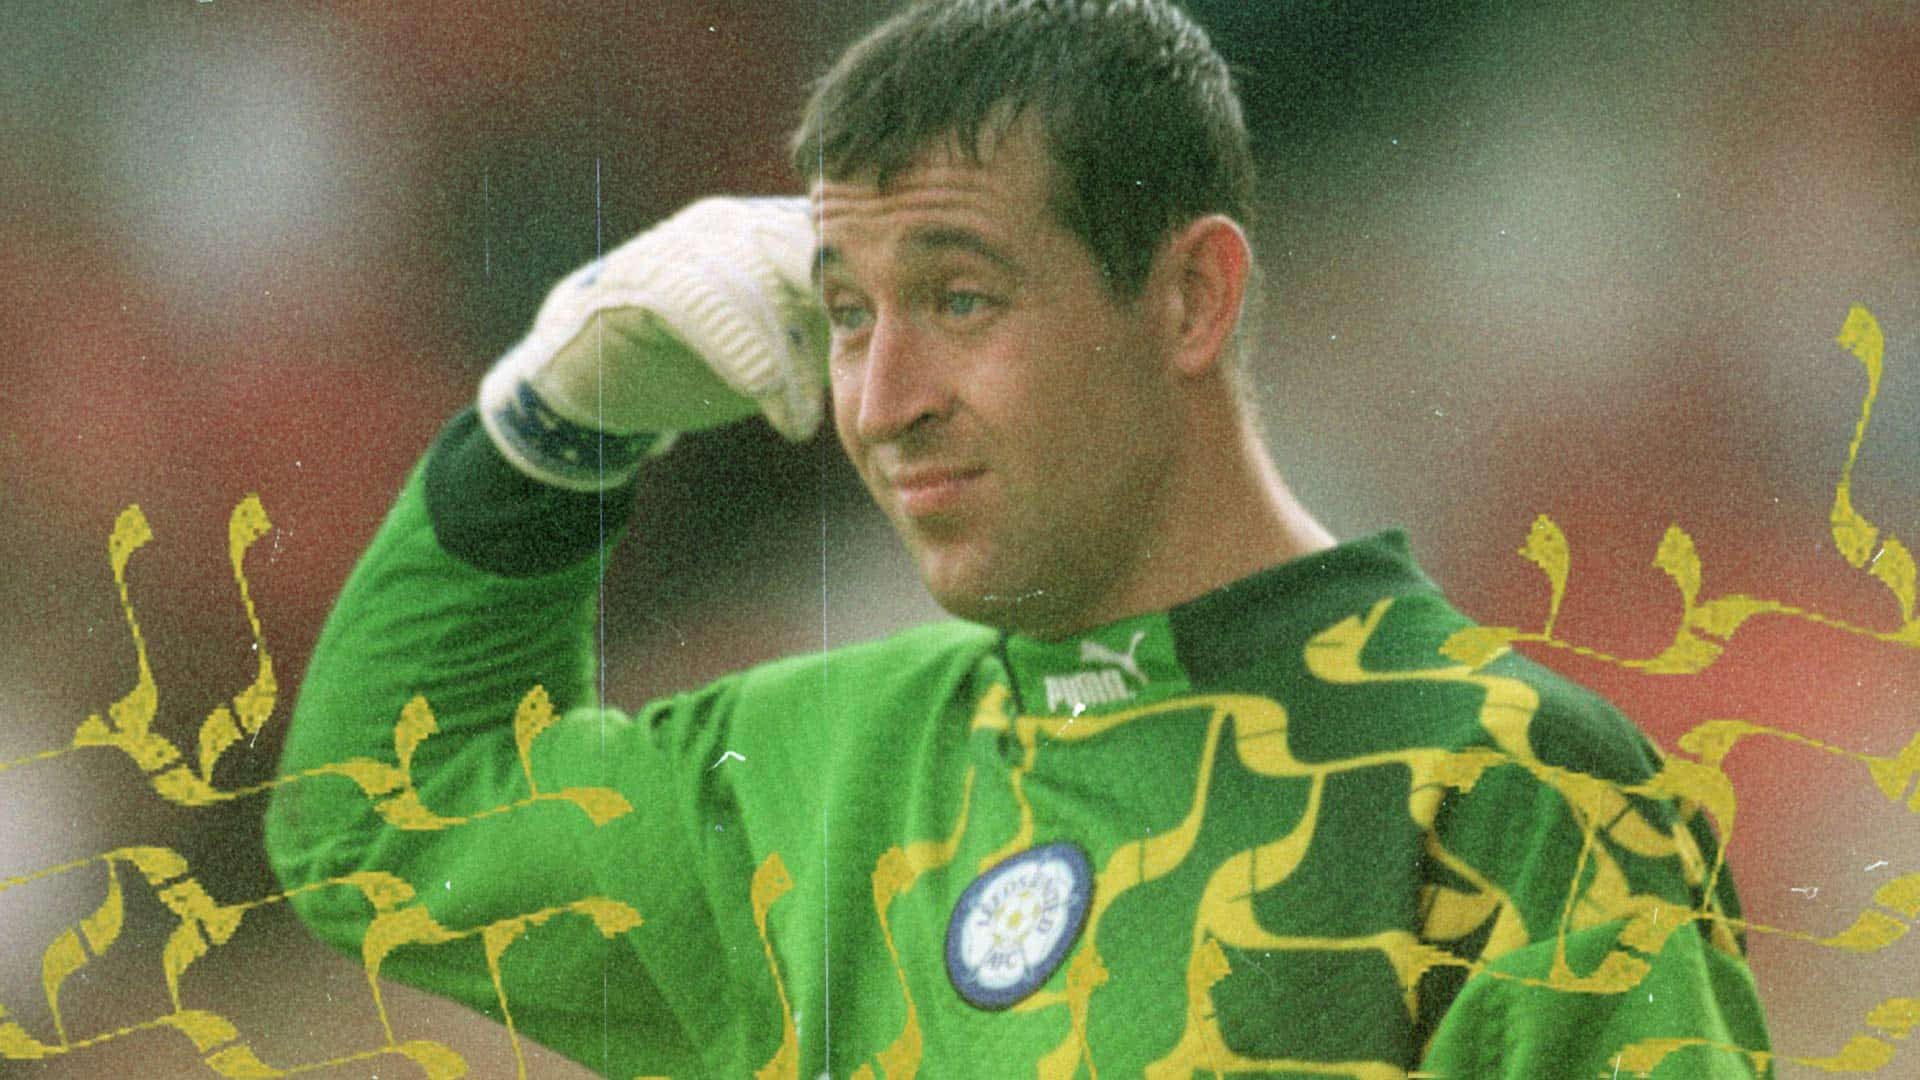 Nigel Martyn in the bright green 96/97 keeper shirt, pointing at his head